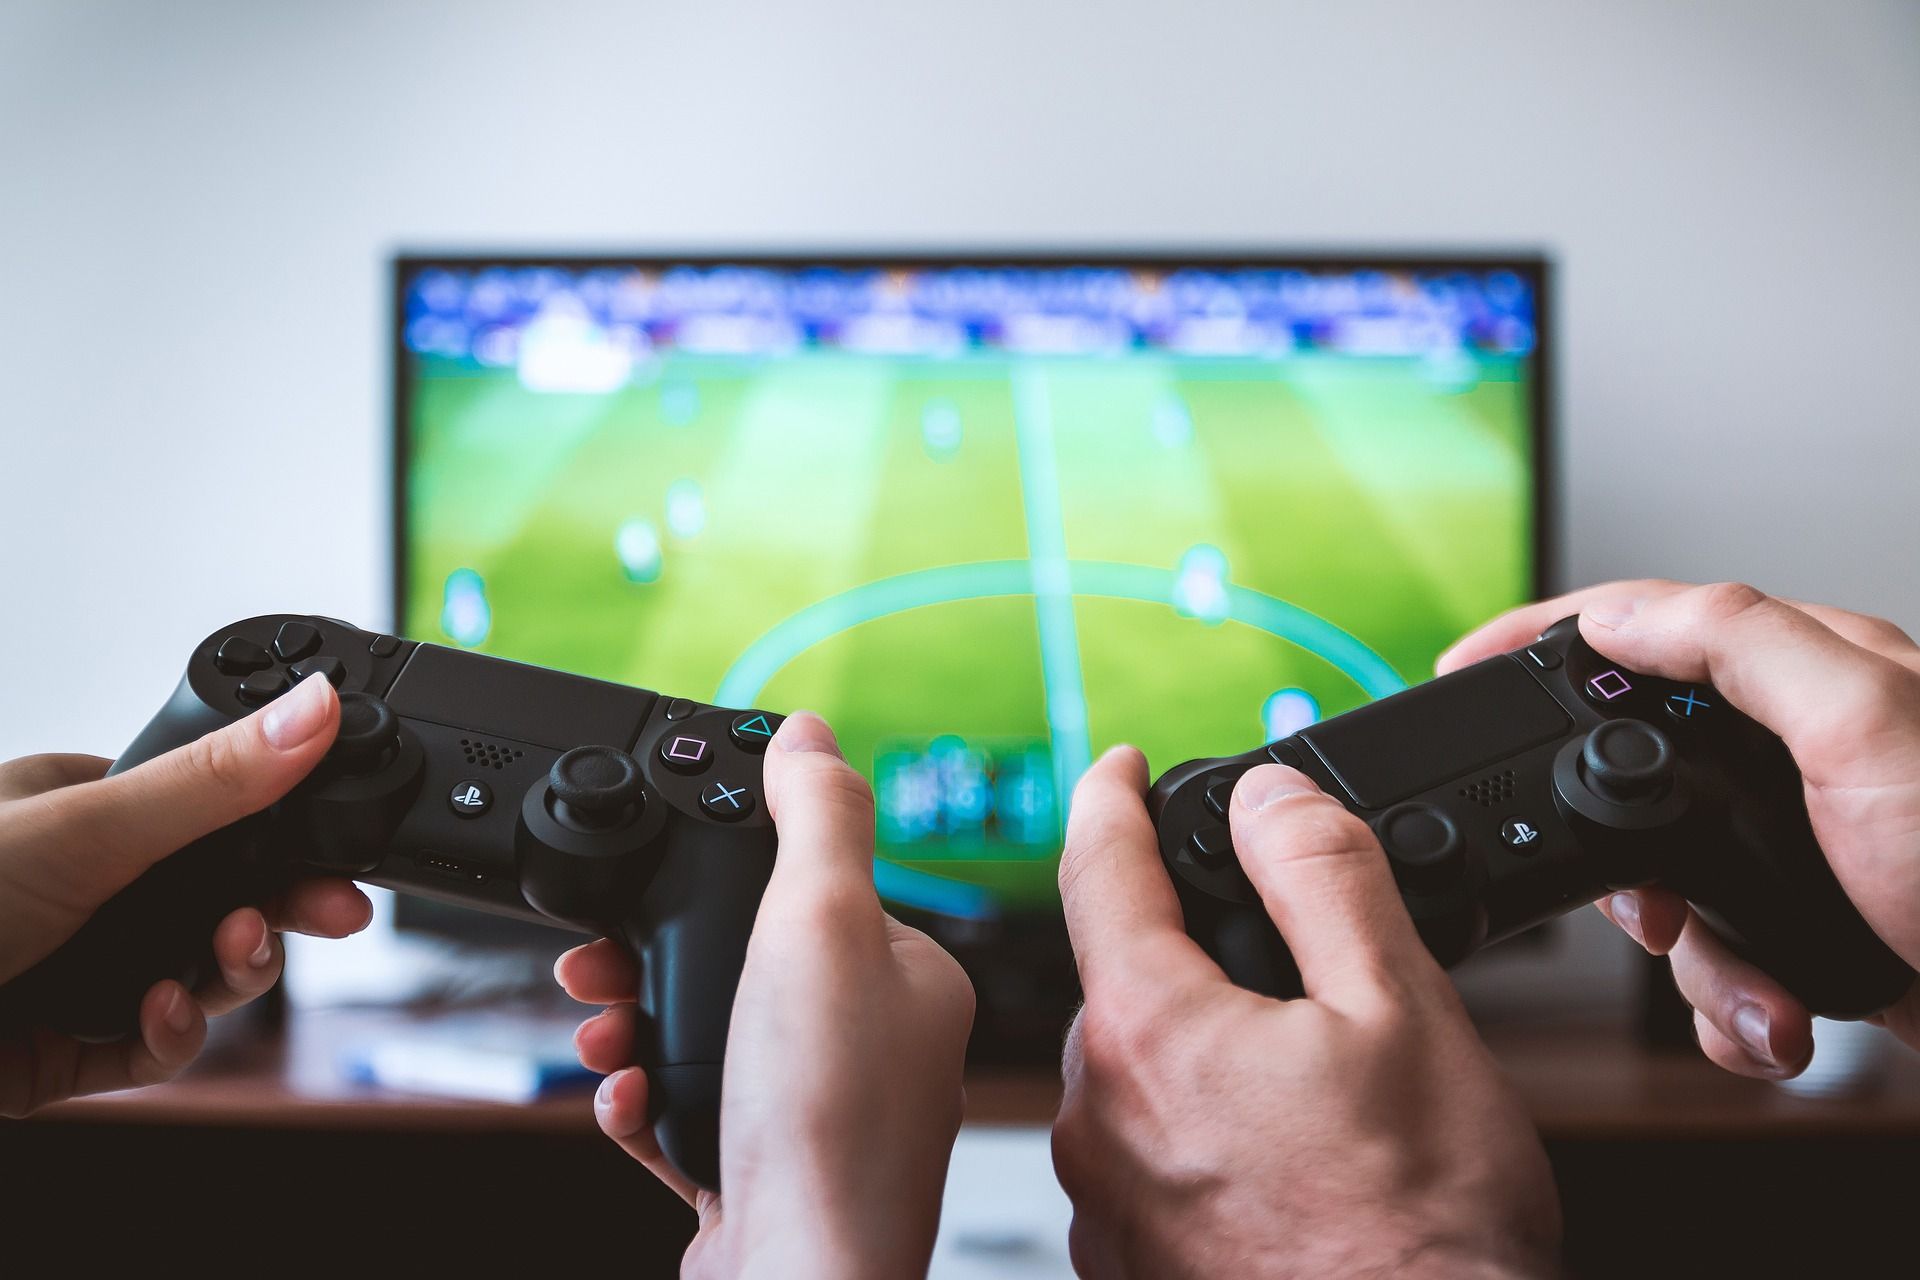 two hands holding video game controllers with television in background